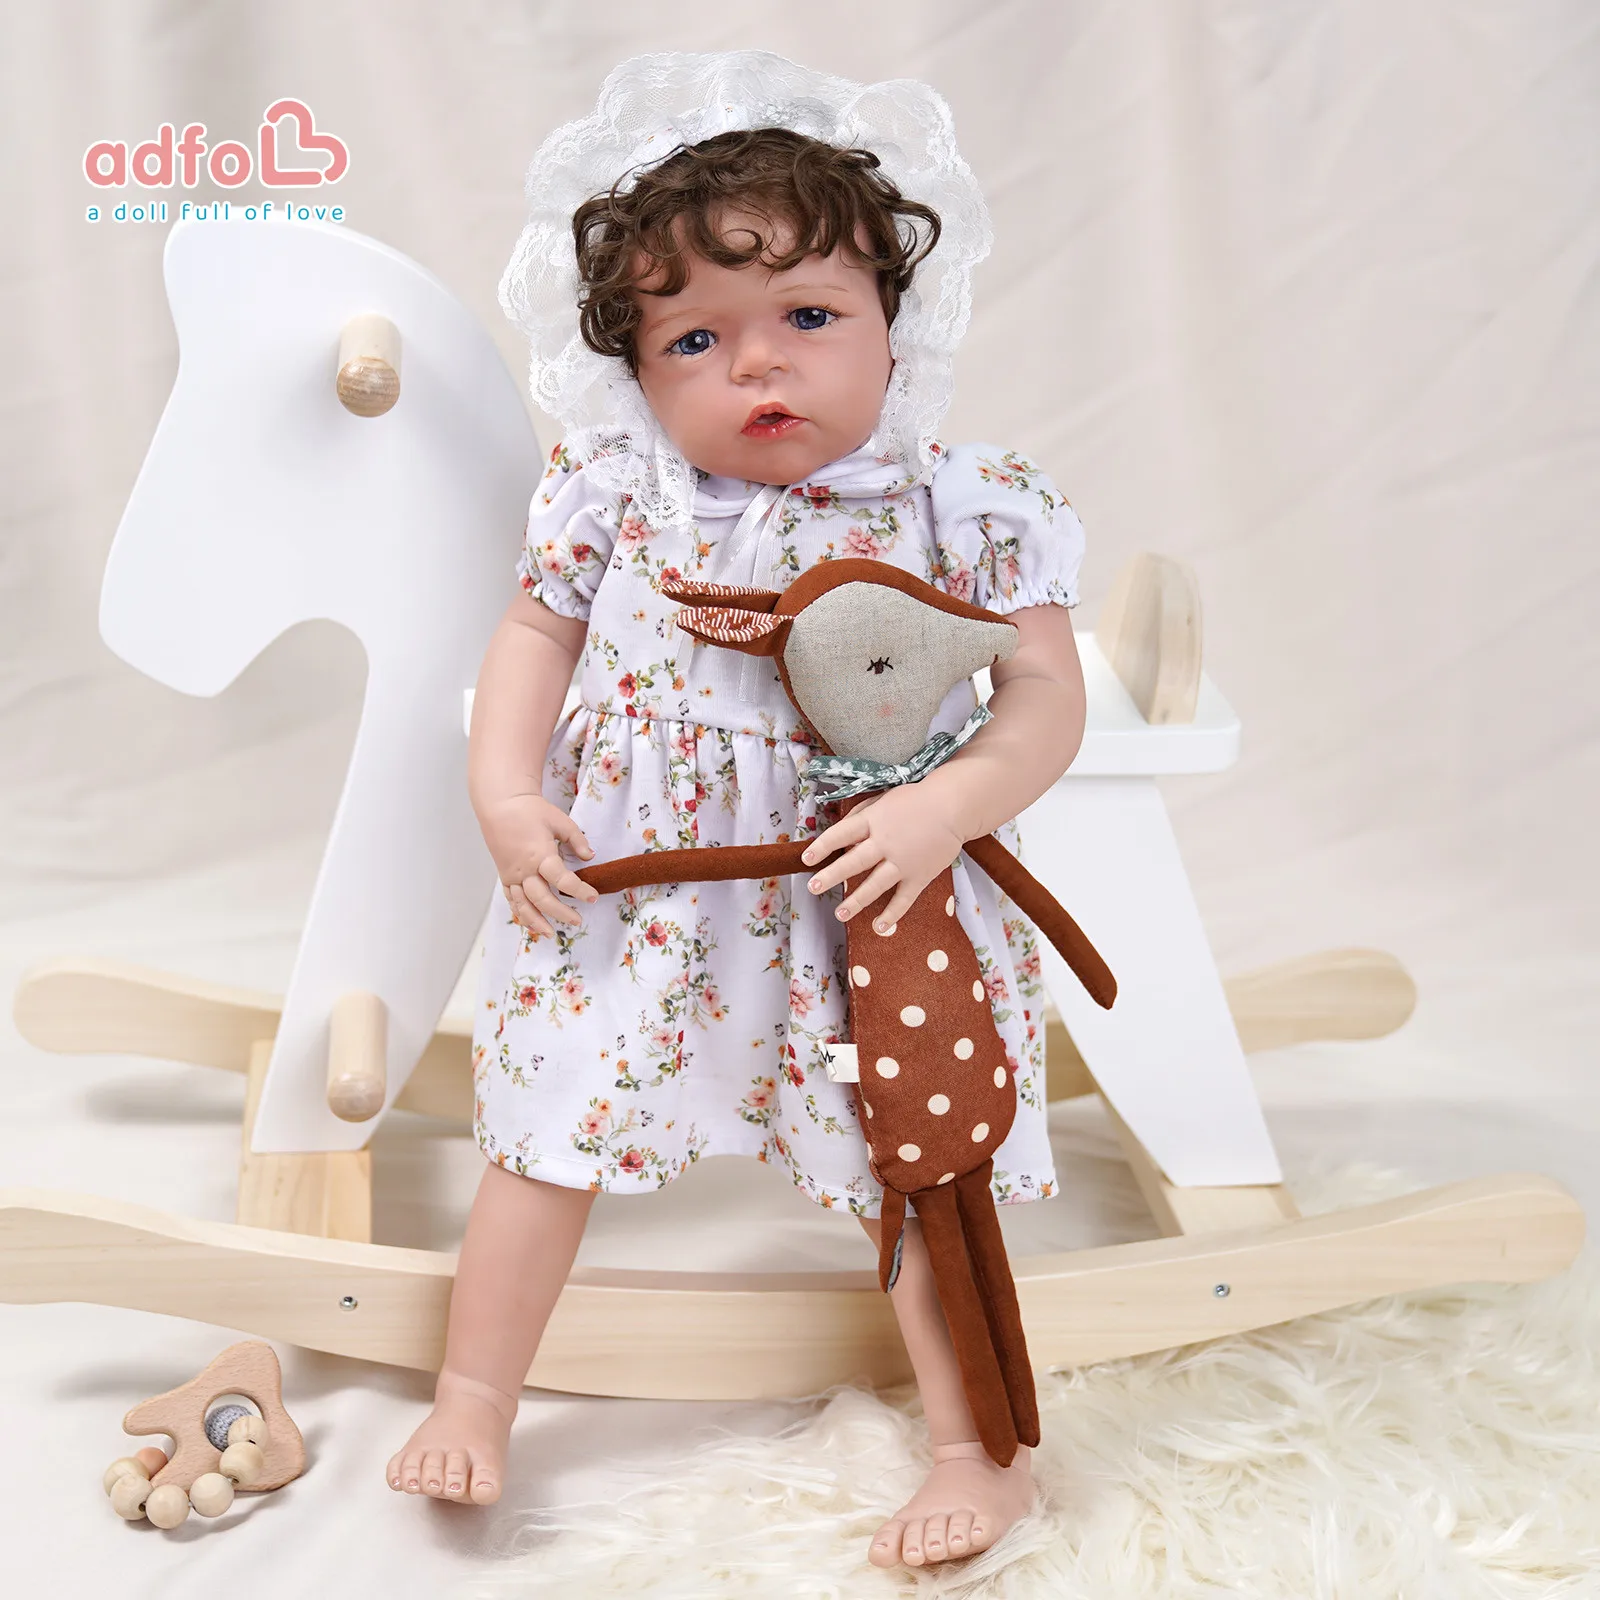 

ADFO 24 Inches Sandie Reborn Dolls Finished Baby Art Collection Realistic Baby Alive Lifelike Newborn Dolls Real Doll Kids Dolls